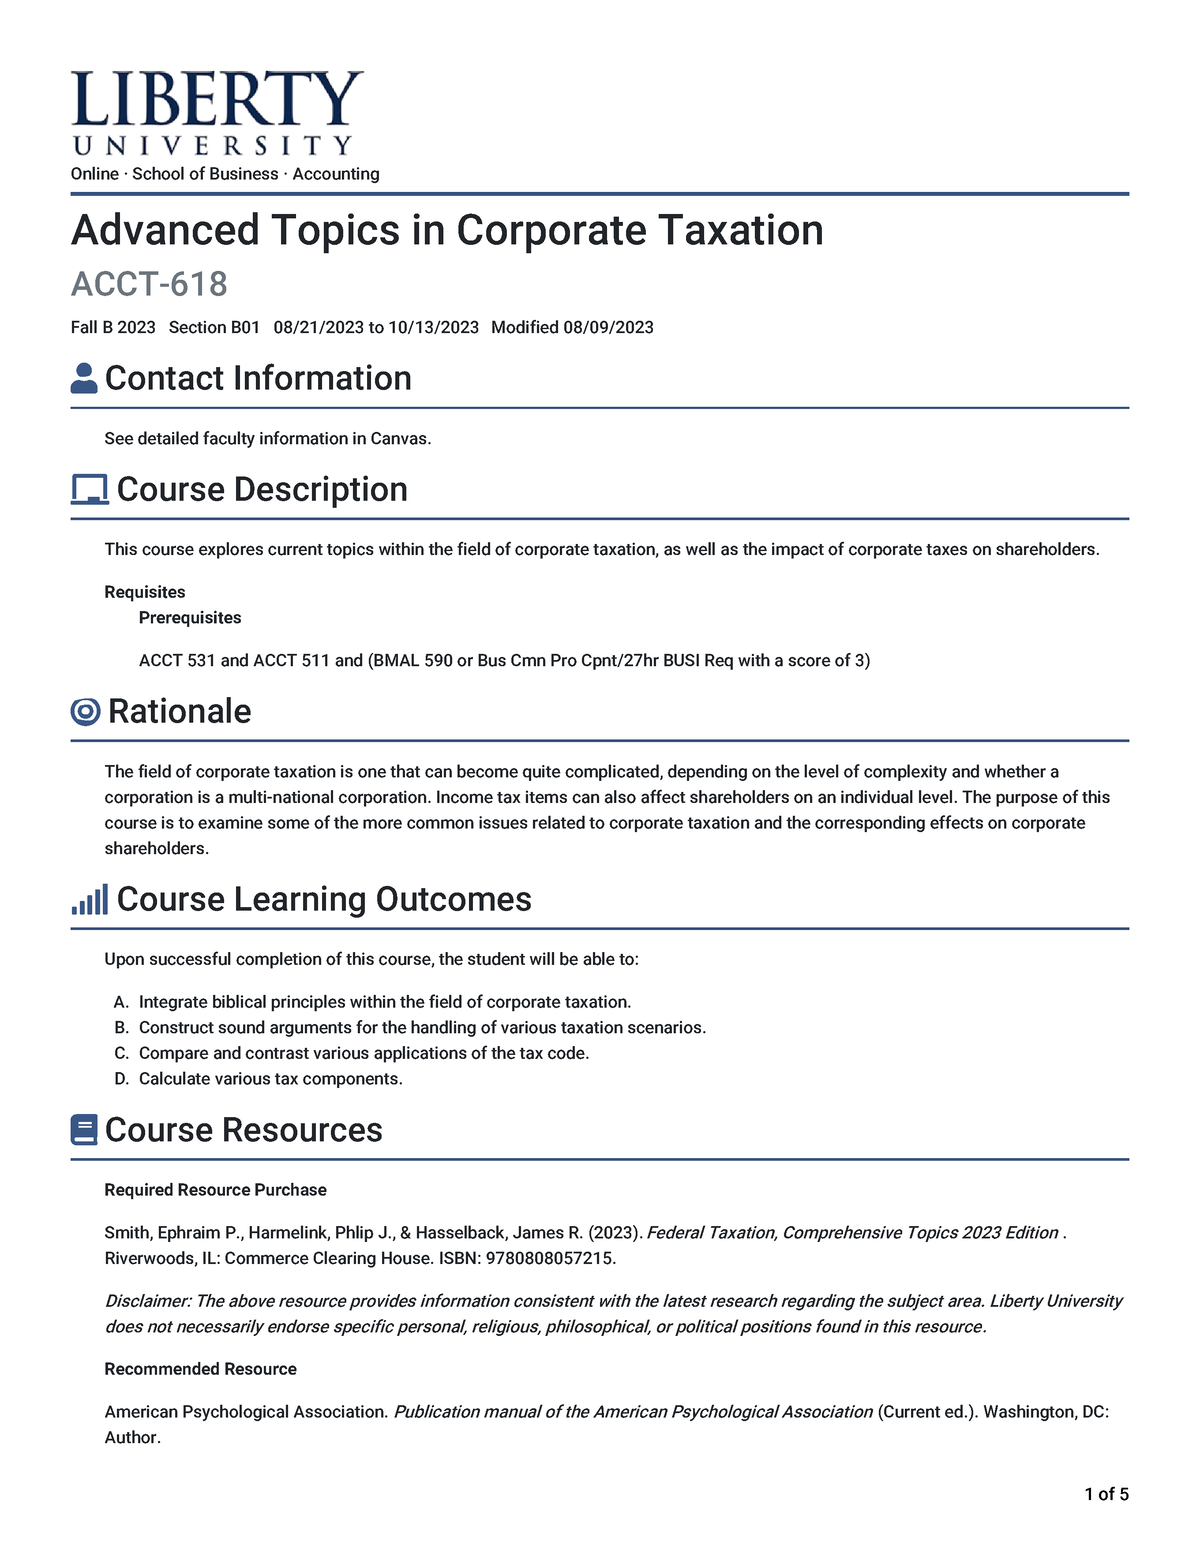 research topics on taxation